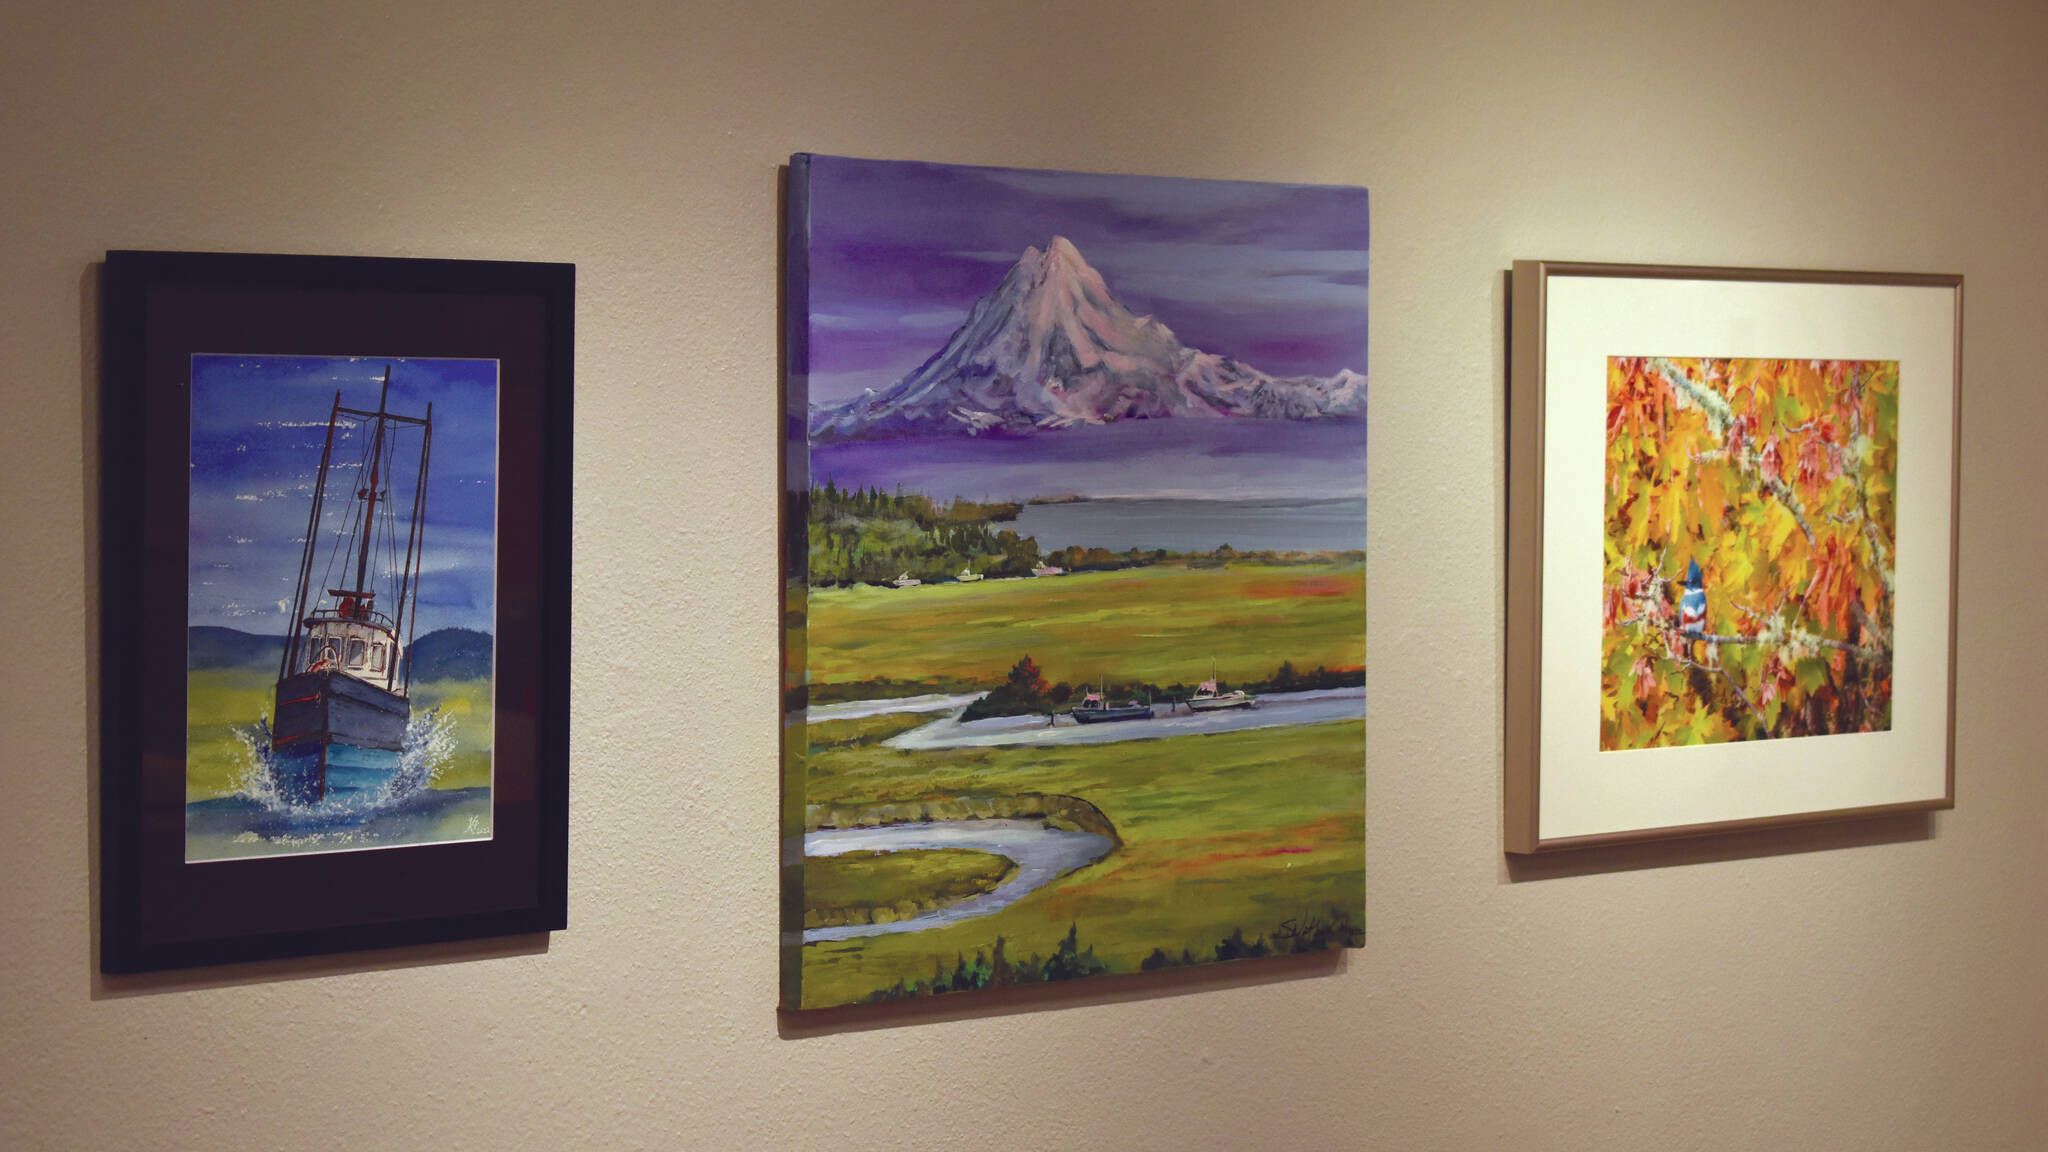 Jake Dye / Peninsula Clarion 
Artwork donated for the Harvest Auction hangs at the Kenai Art Center on Tuesday in Kenai.